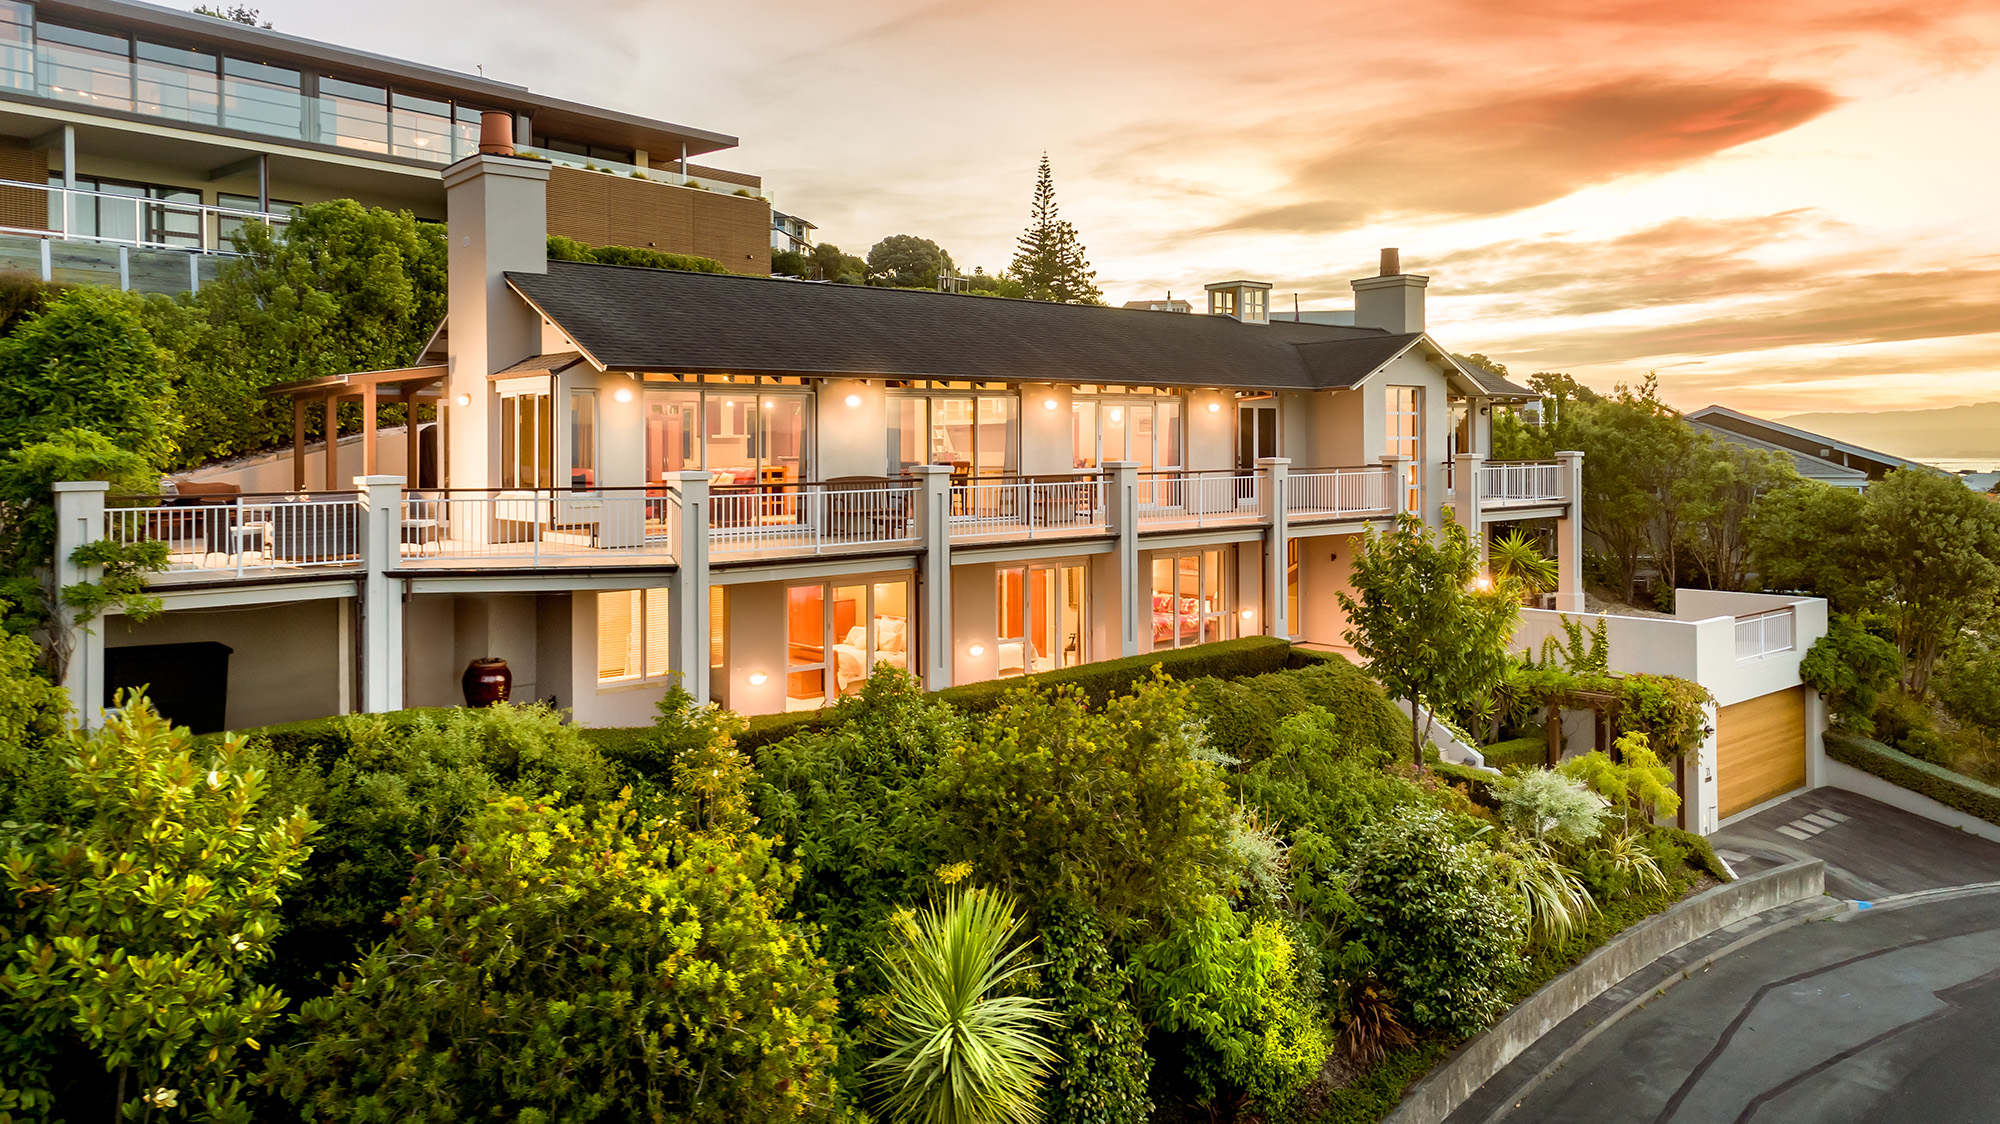 71 The Cliffs - Nelson New Zealand Real Estate Listing